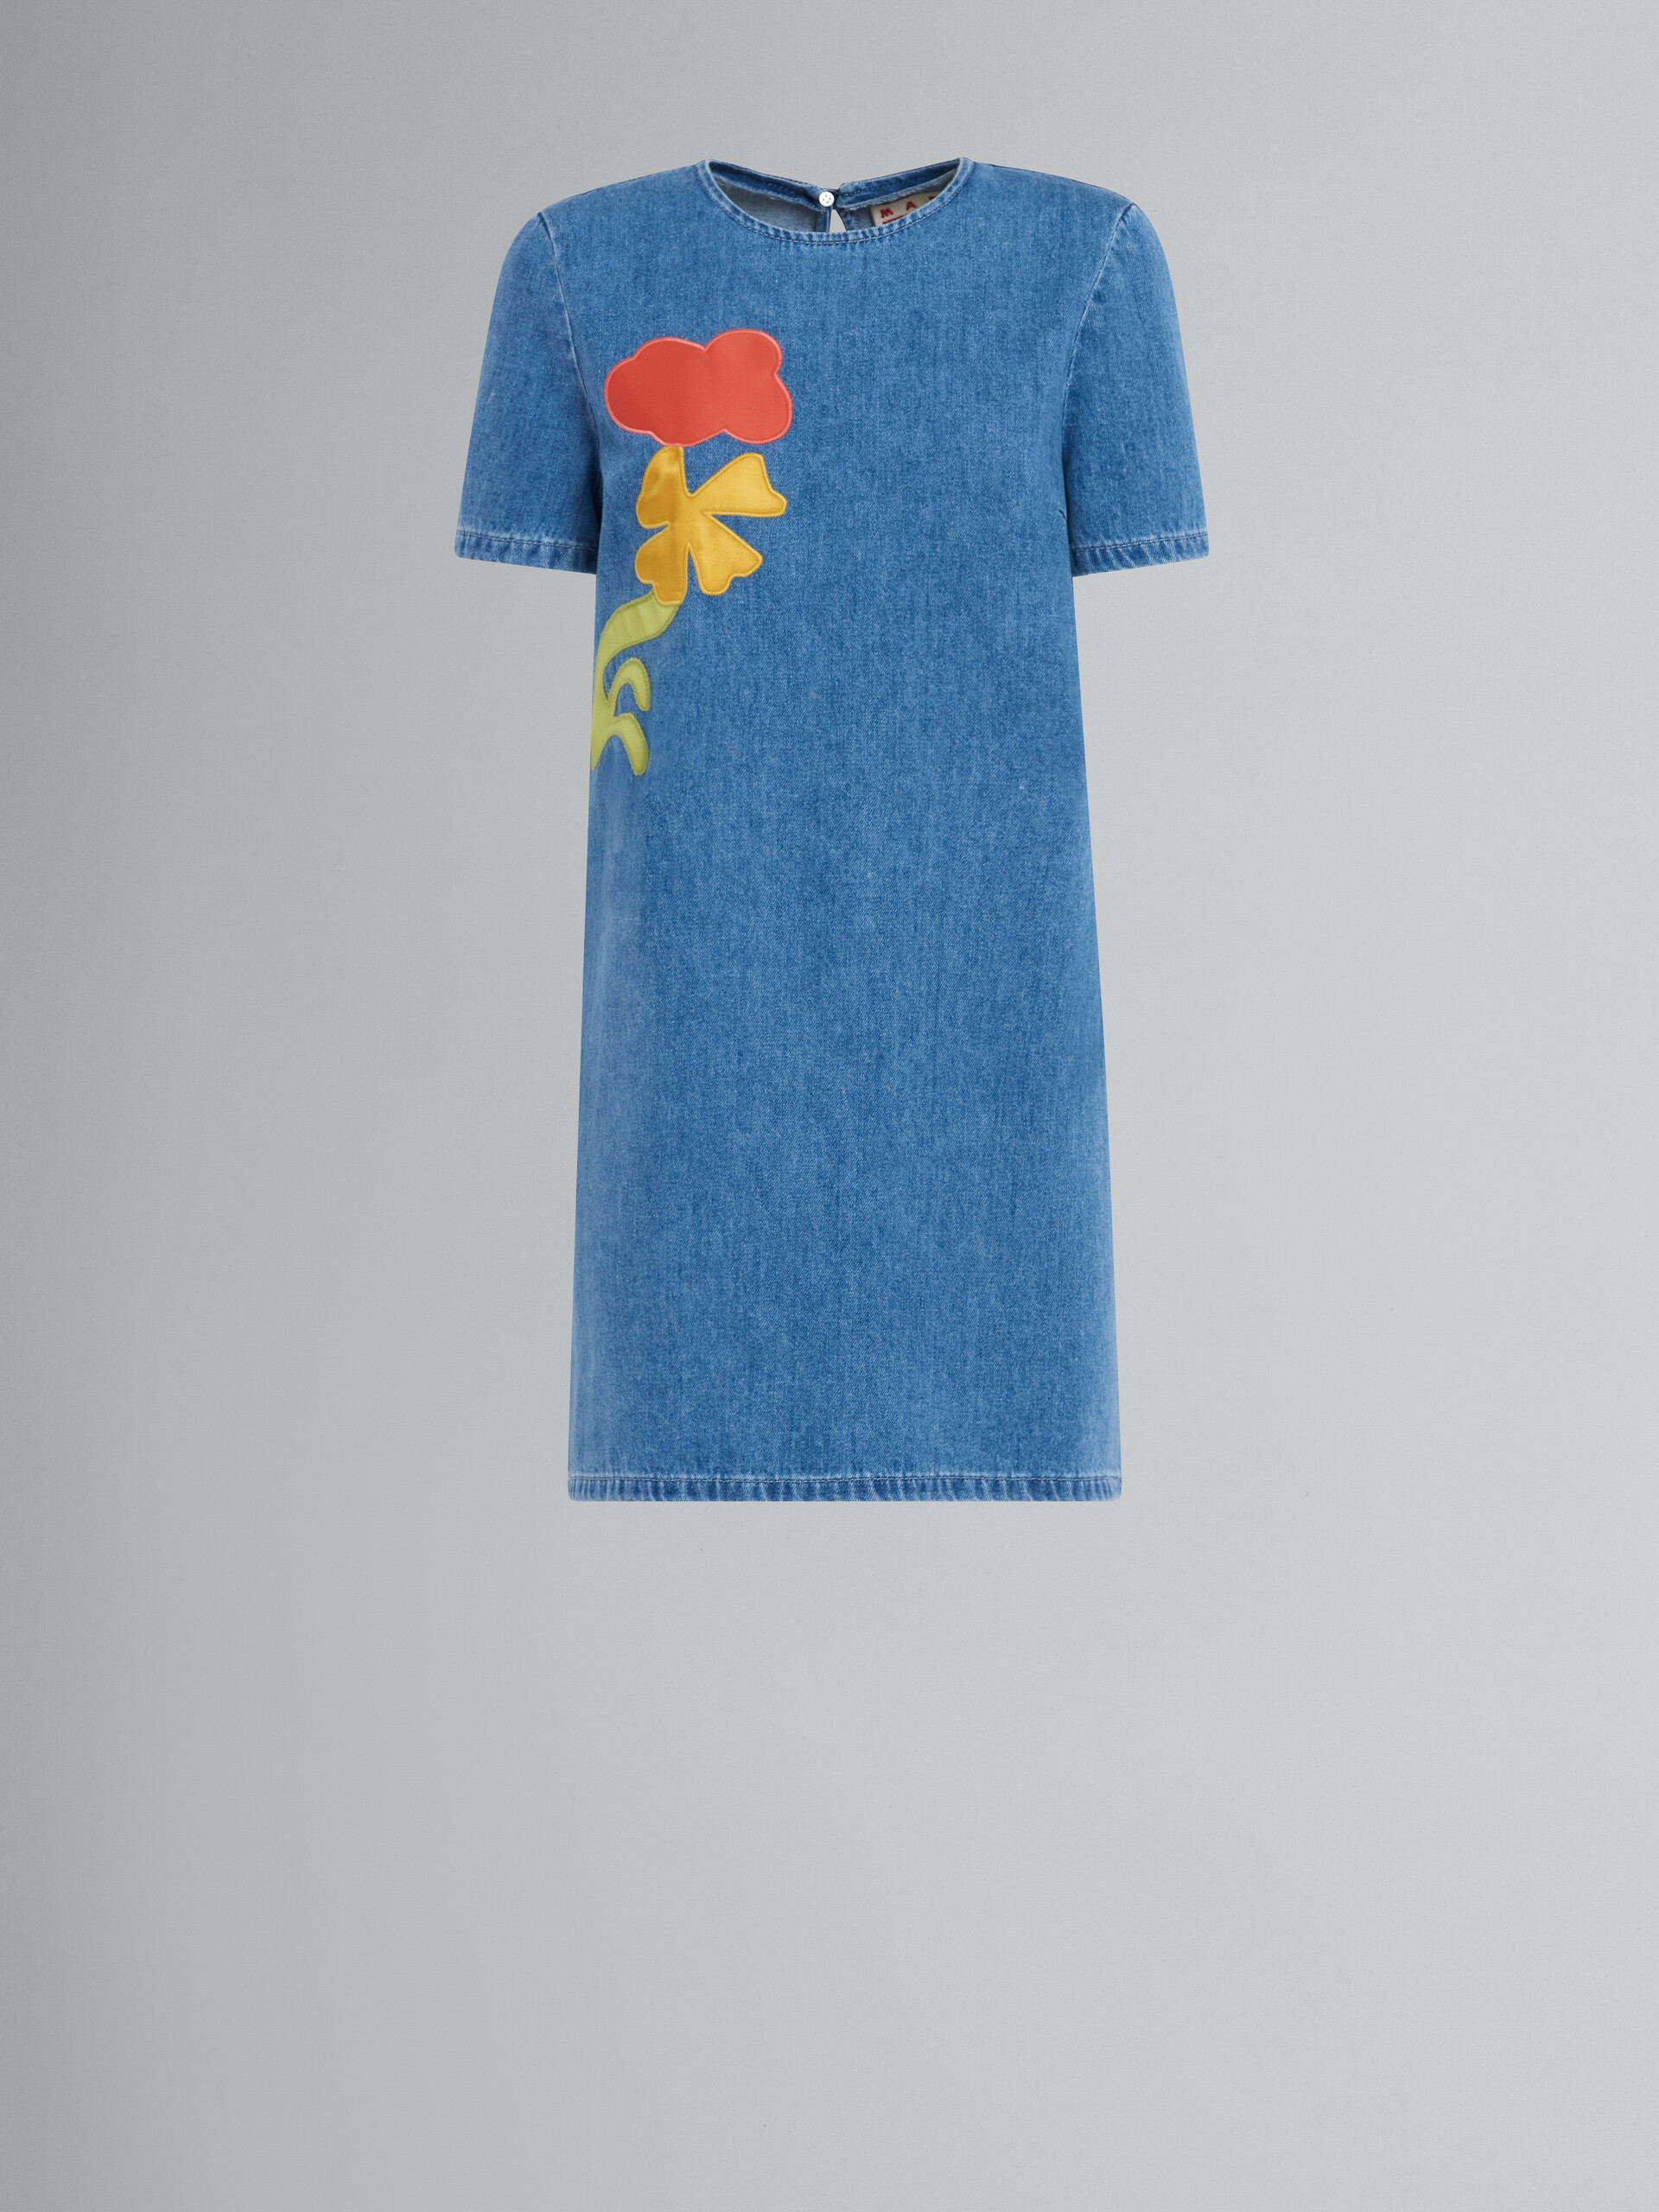 Marni x No Vacancy Inn - Blue chambray short dress with embroidery - Dresses - Image 1